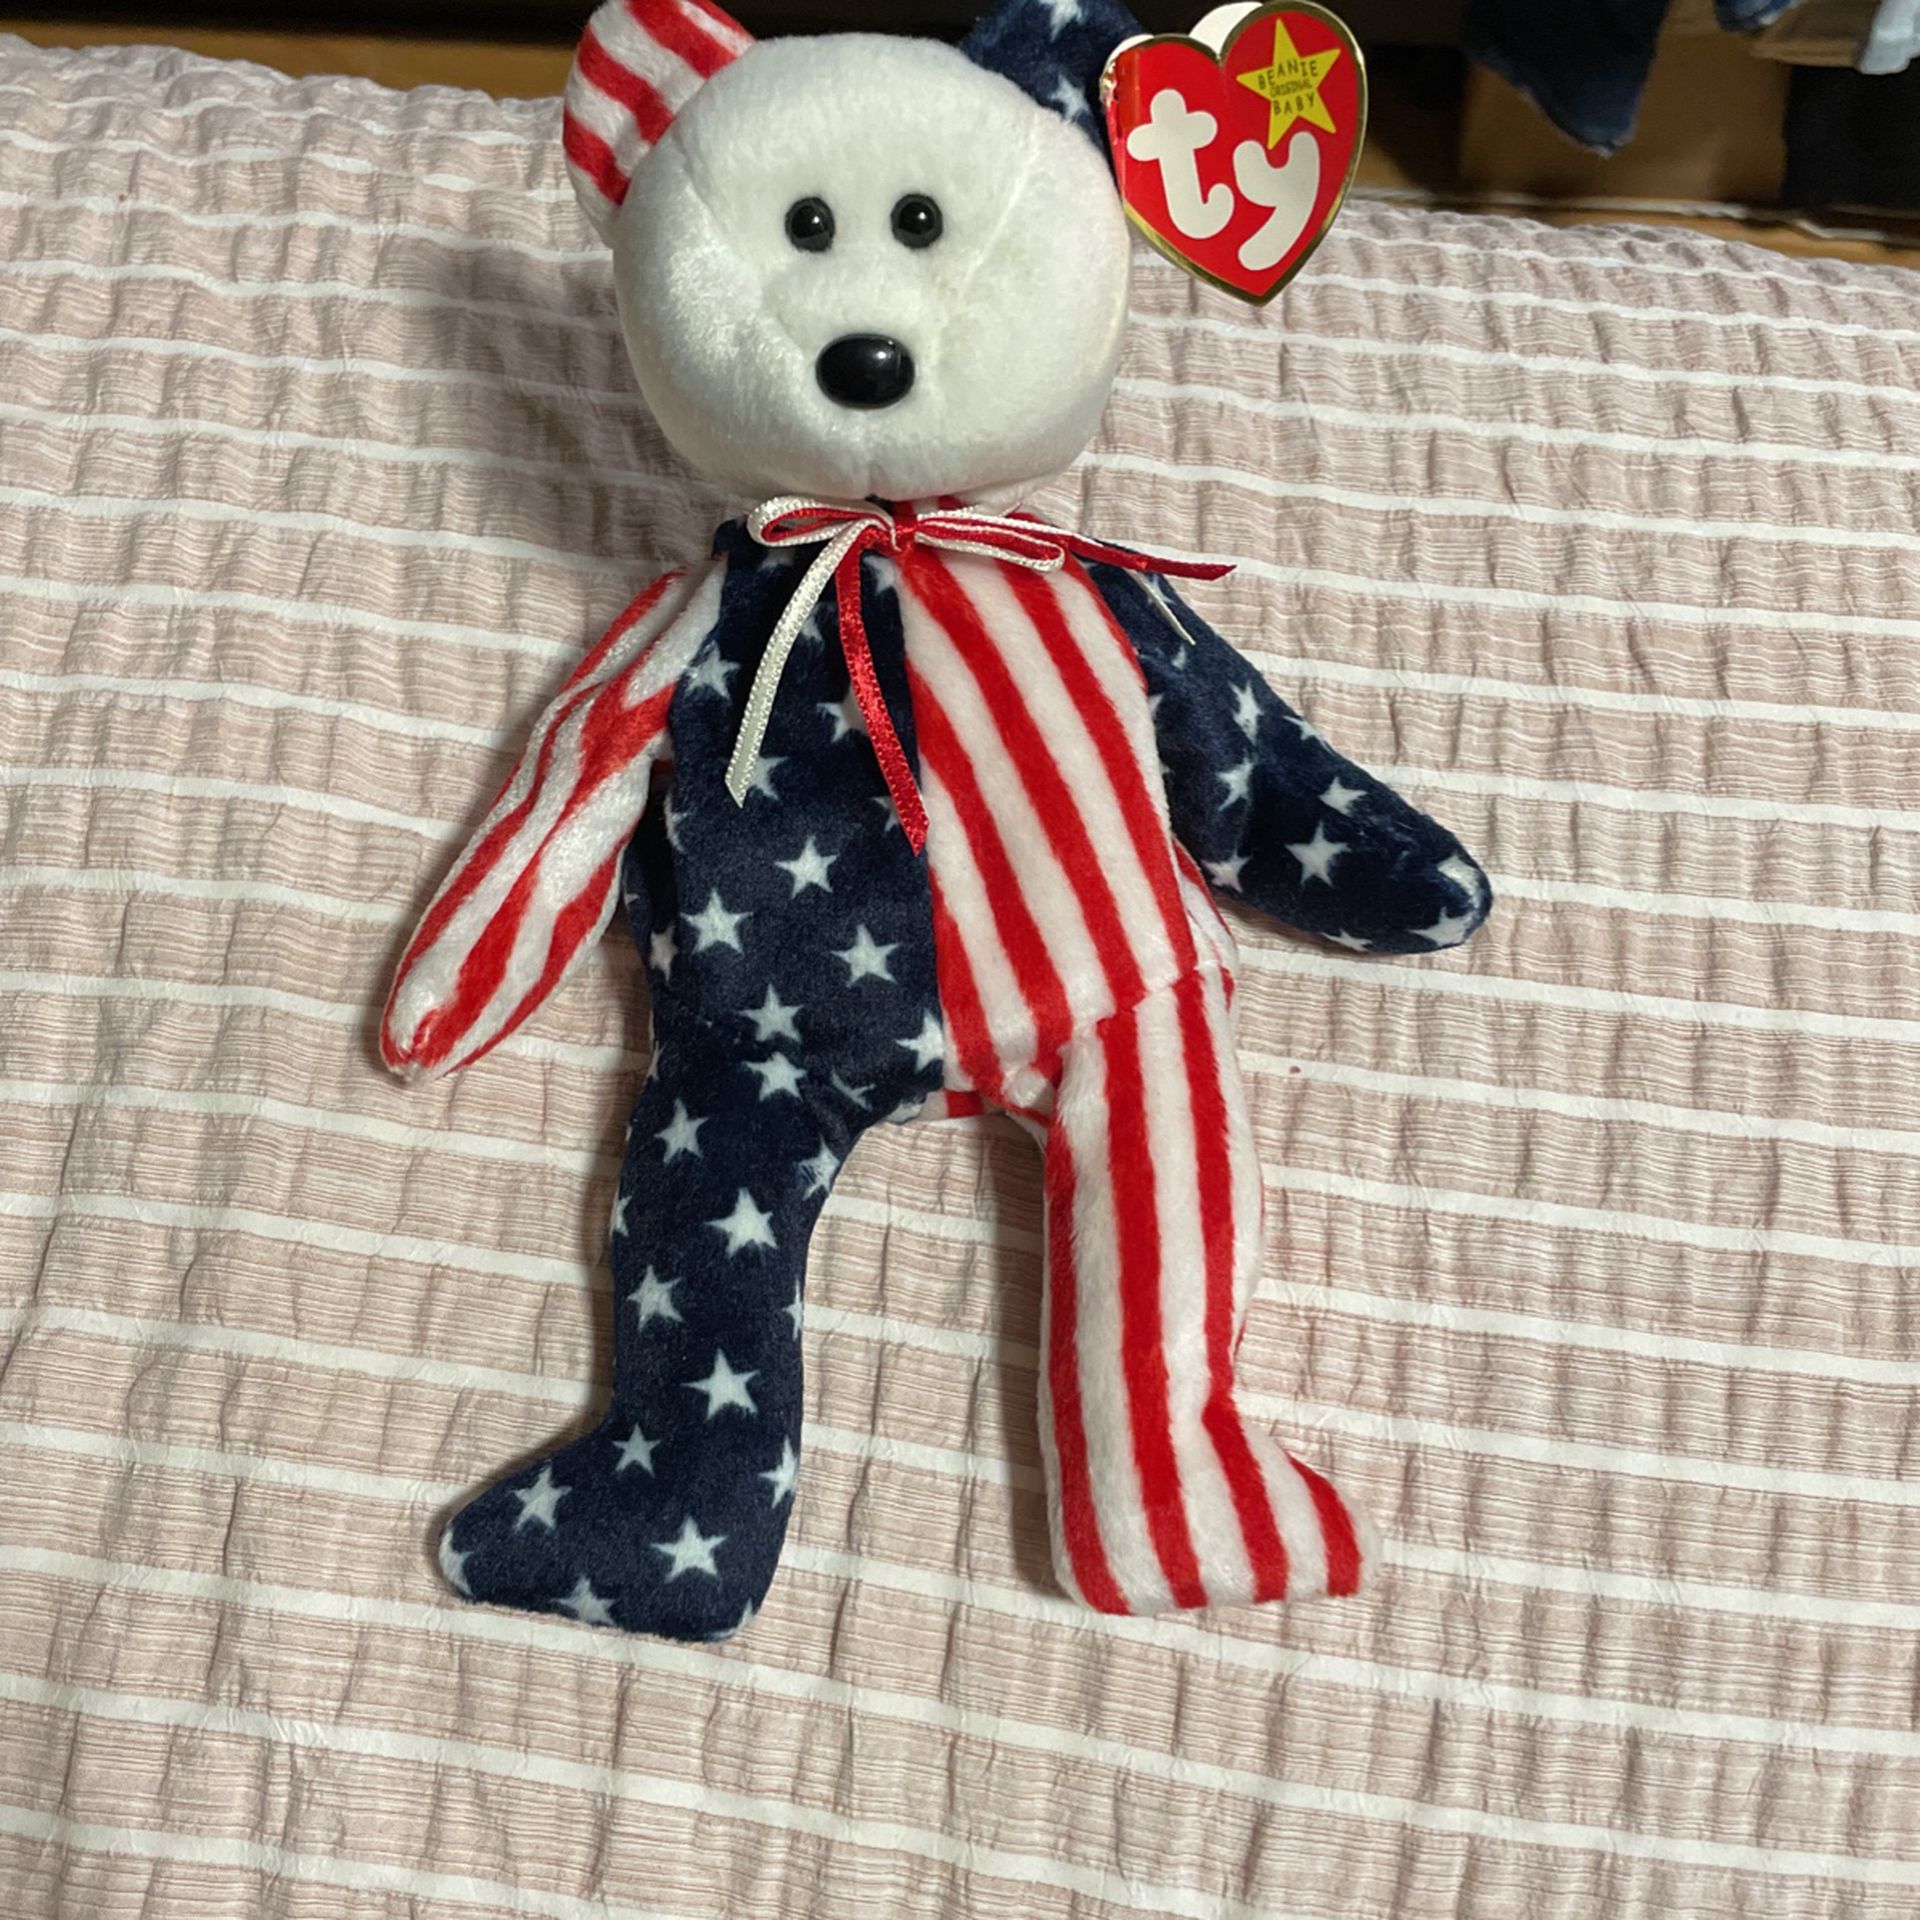 TY Beanie Baby "SPANGLE" Birth June 14, 1999 Exclusive to the United States